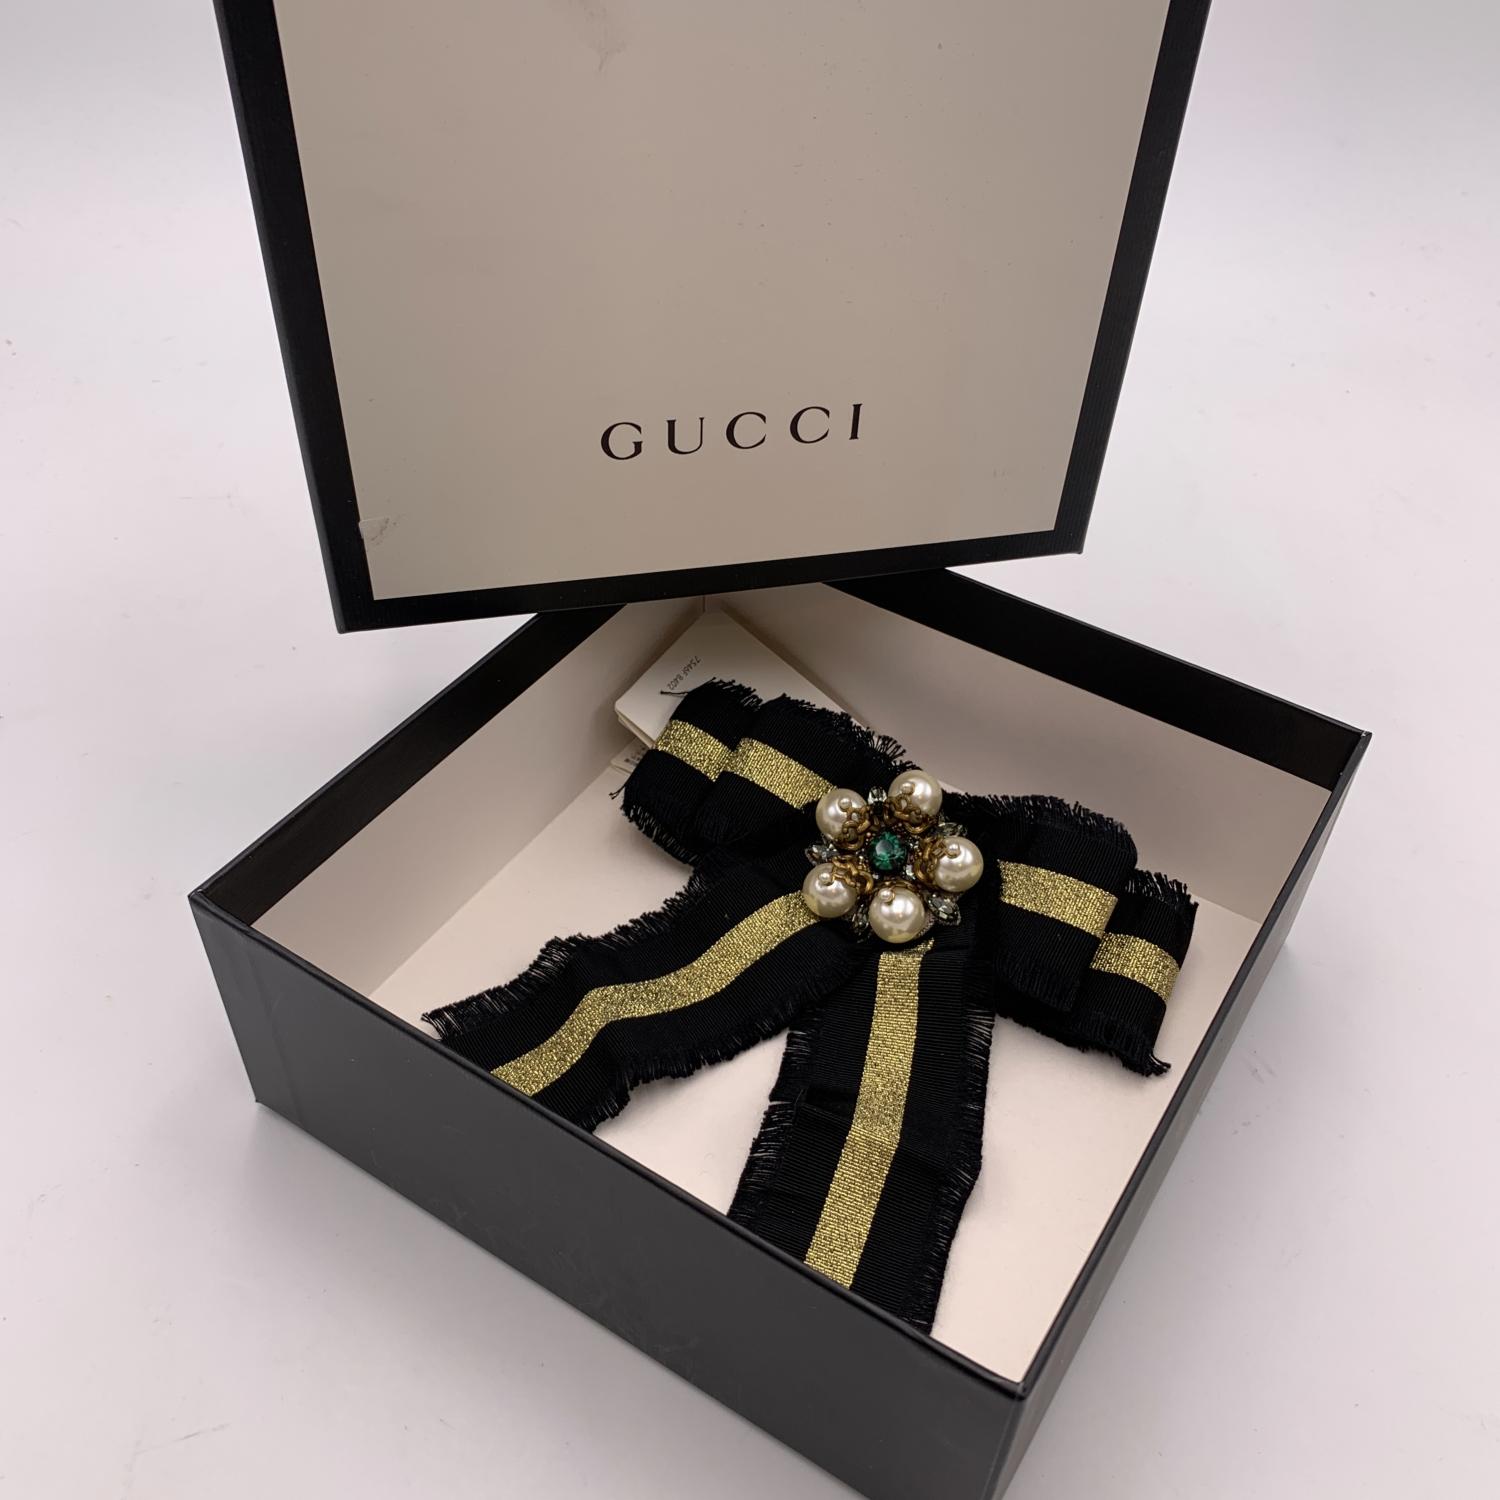 Beautiful Gucci black and gold striped grosgrain bow brooch. Pearls and rhinestones embellishment on the front. Frayed edges. Safety pin closure on the back. Approx. width: 6 inches - 15.2 cm. Approx. height: 6.5 inches - 16.5 cm. Signed 'Gucci' on